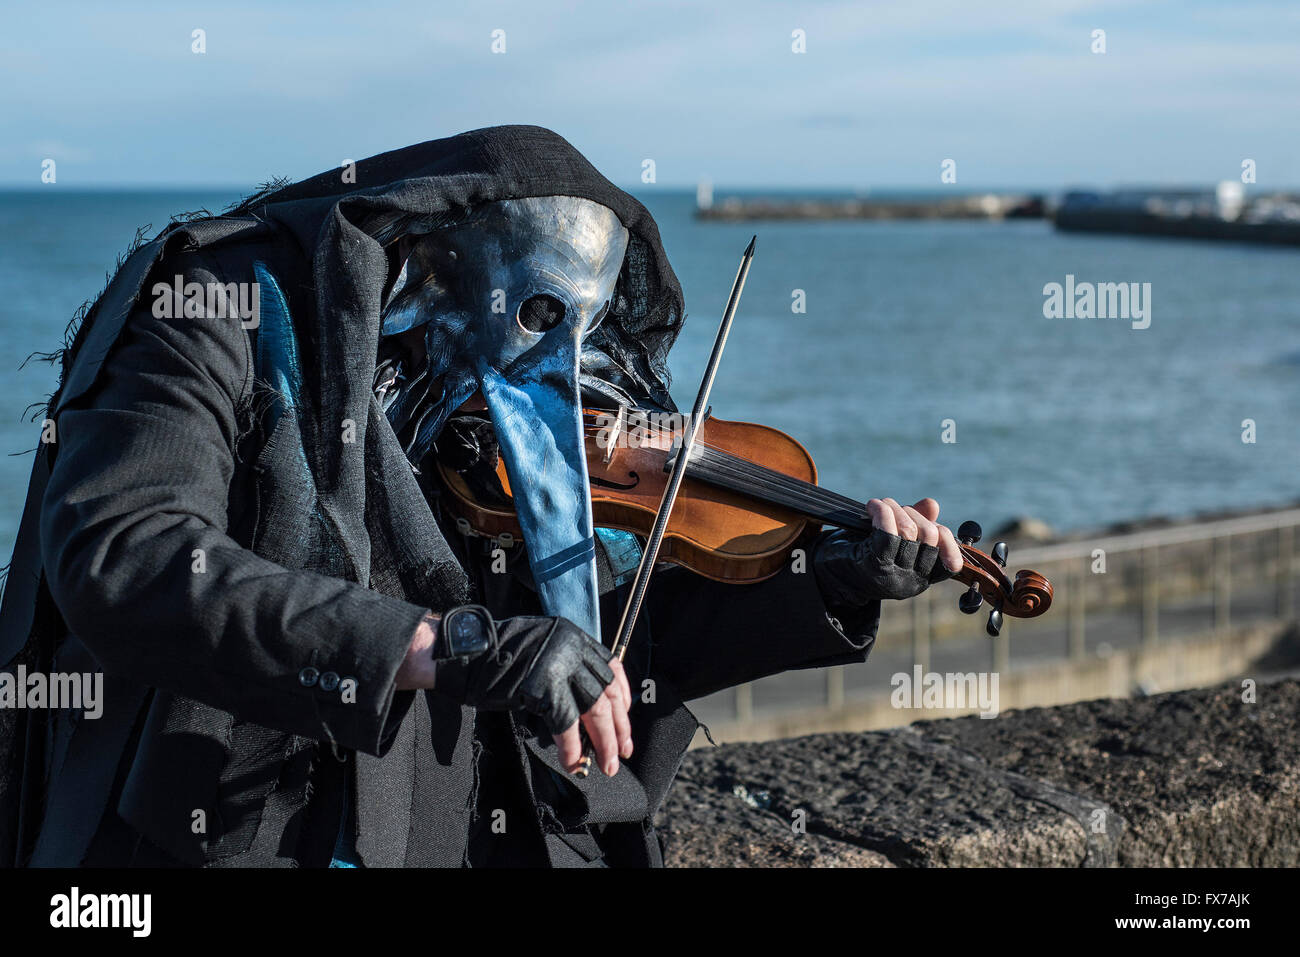 A masked guiser plays the violin. Stock Photo